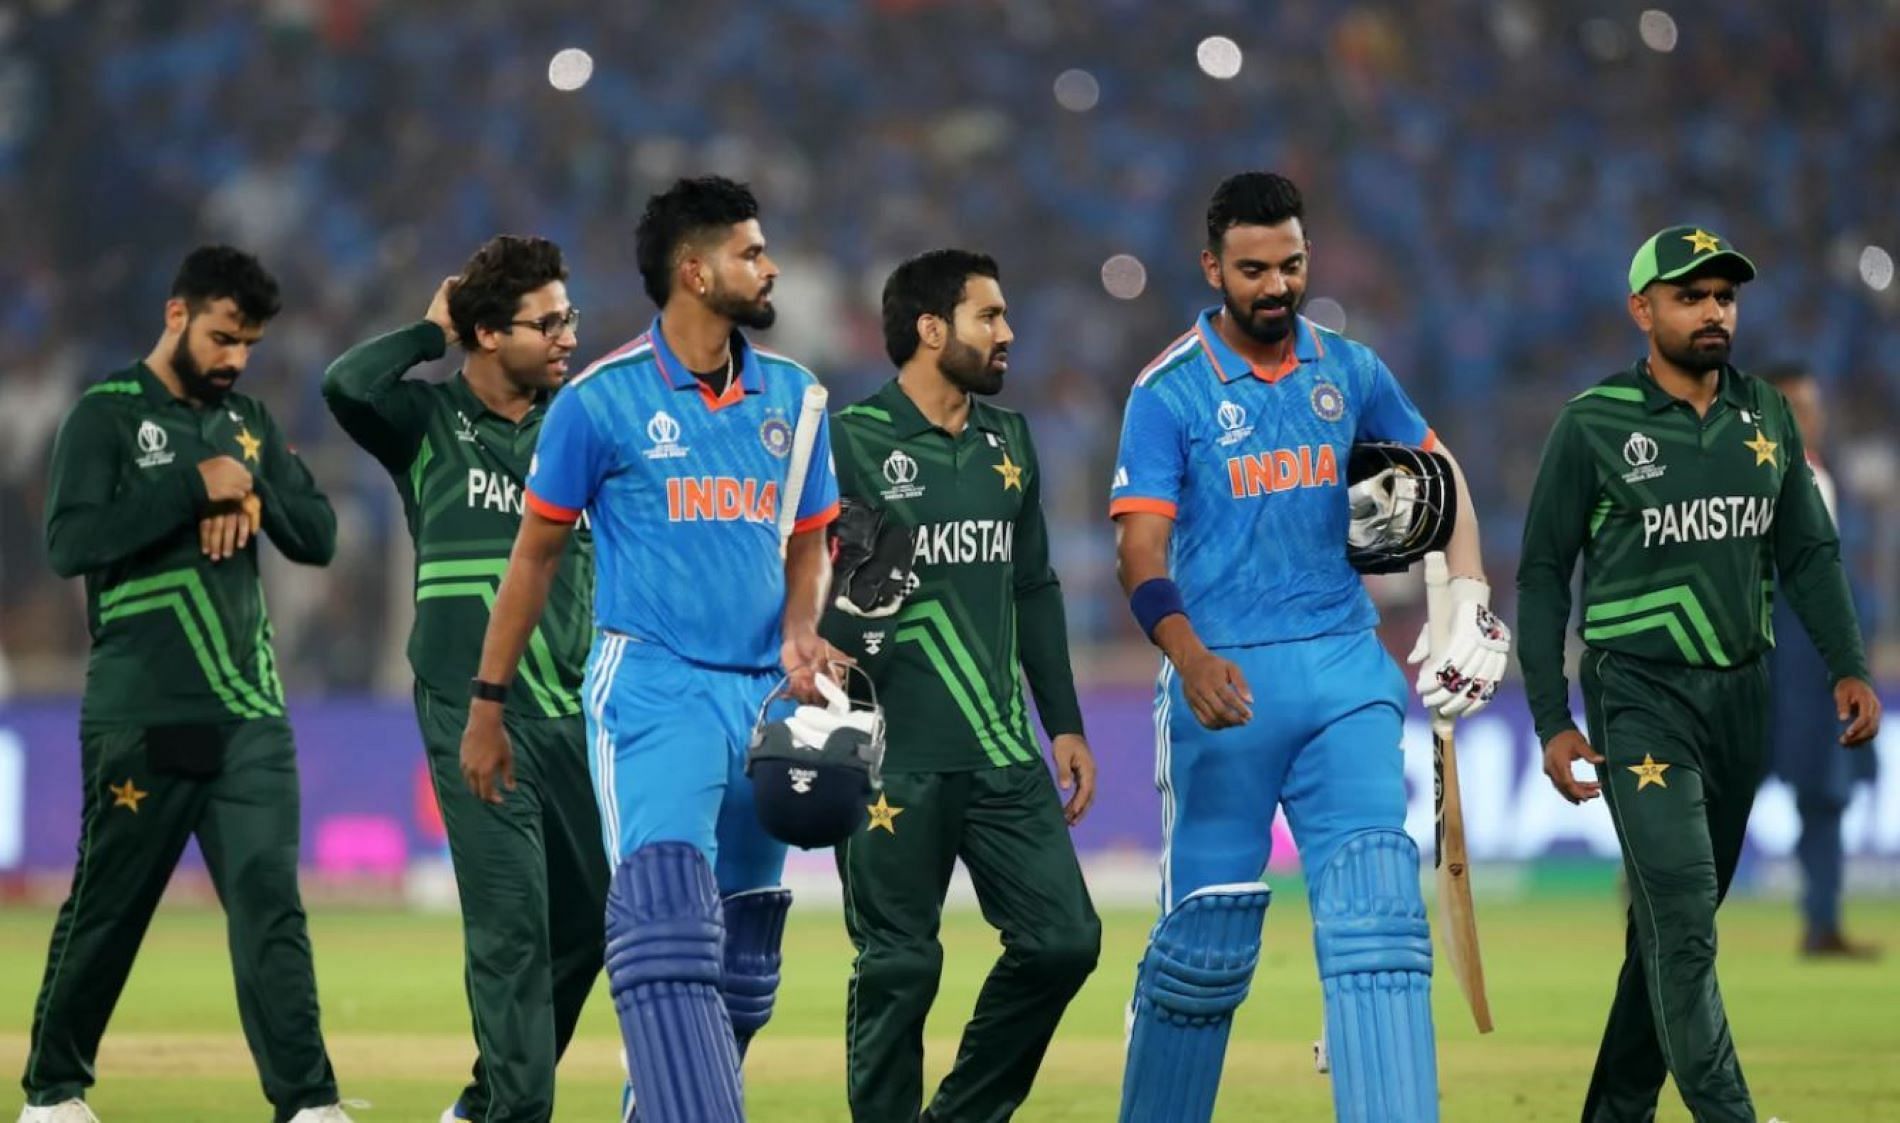 Team India steamrolled Pakistan yet again in a World Cup game.